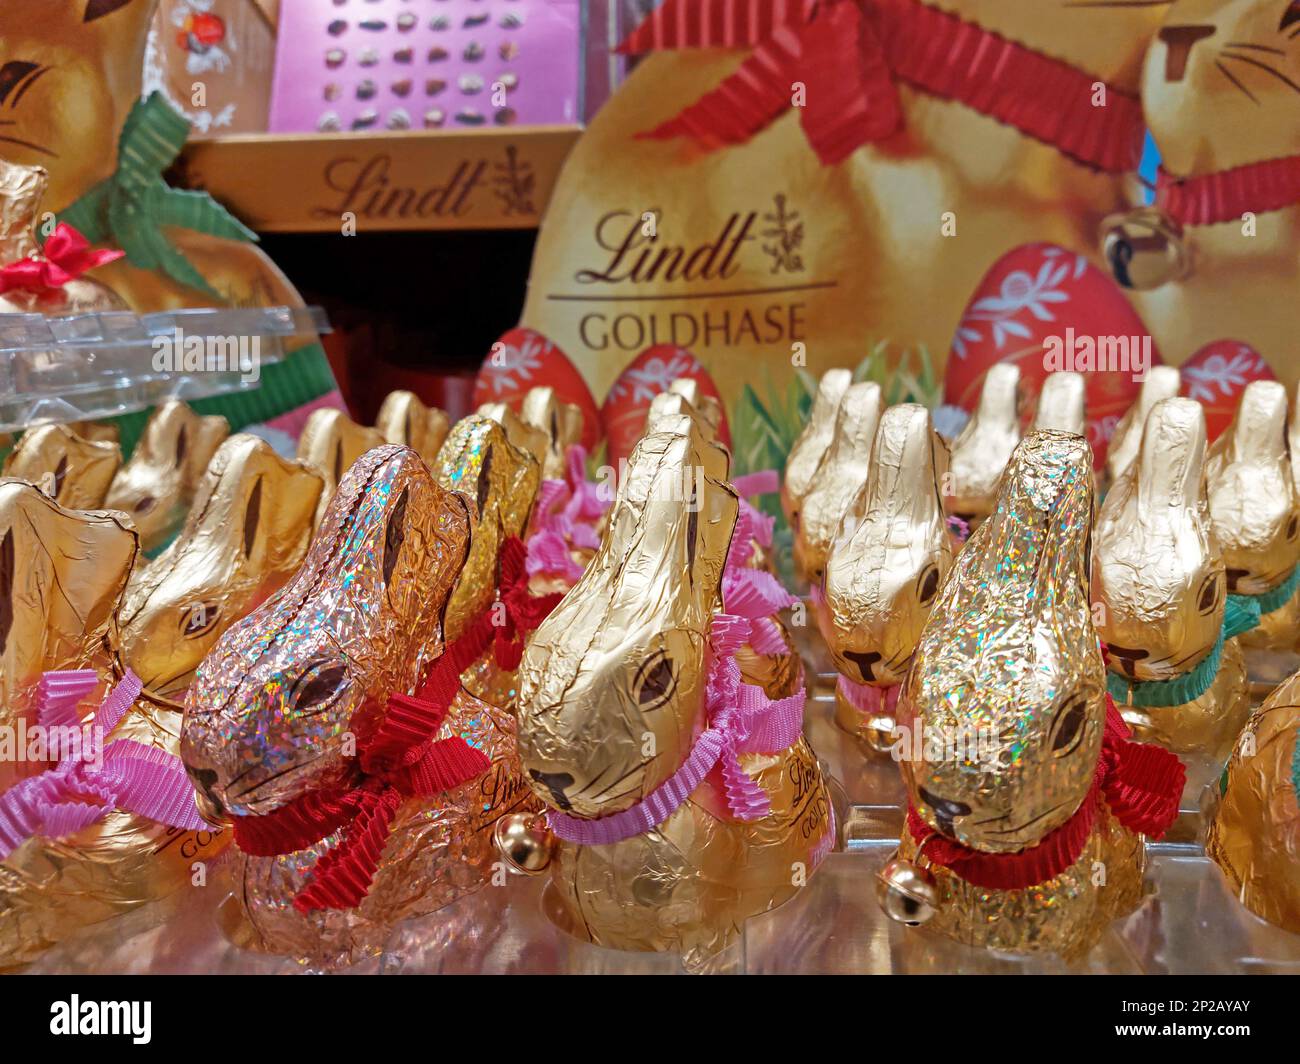 chocolate easter gold bunnies by Lindt in a supermarket Stock Photo